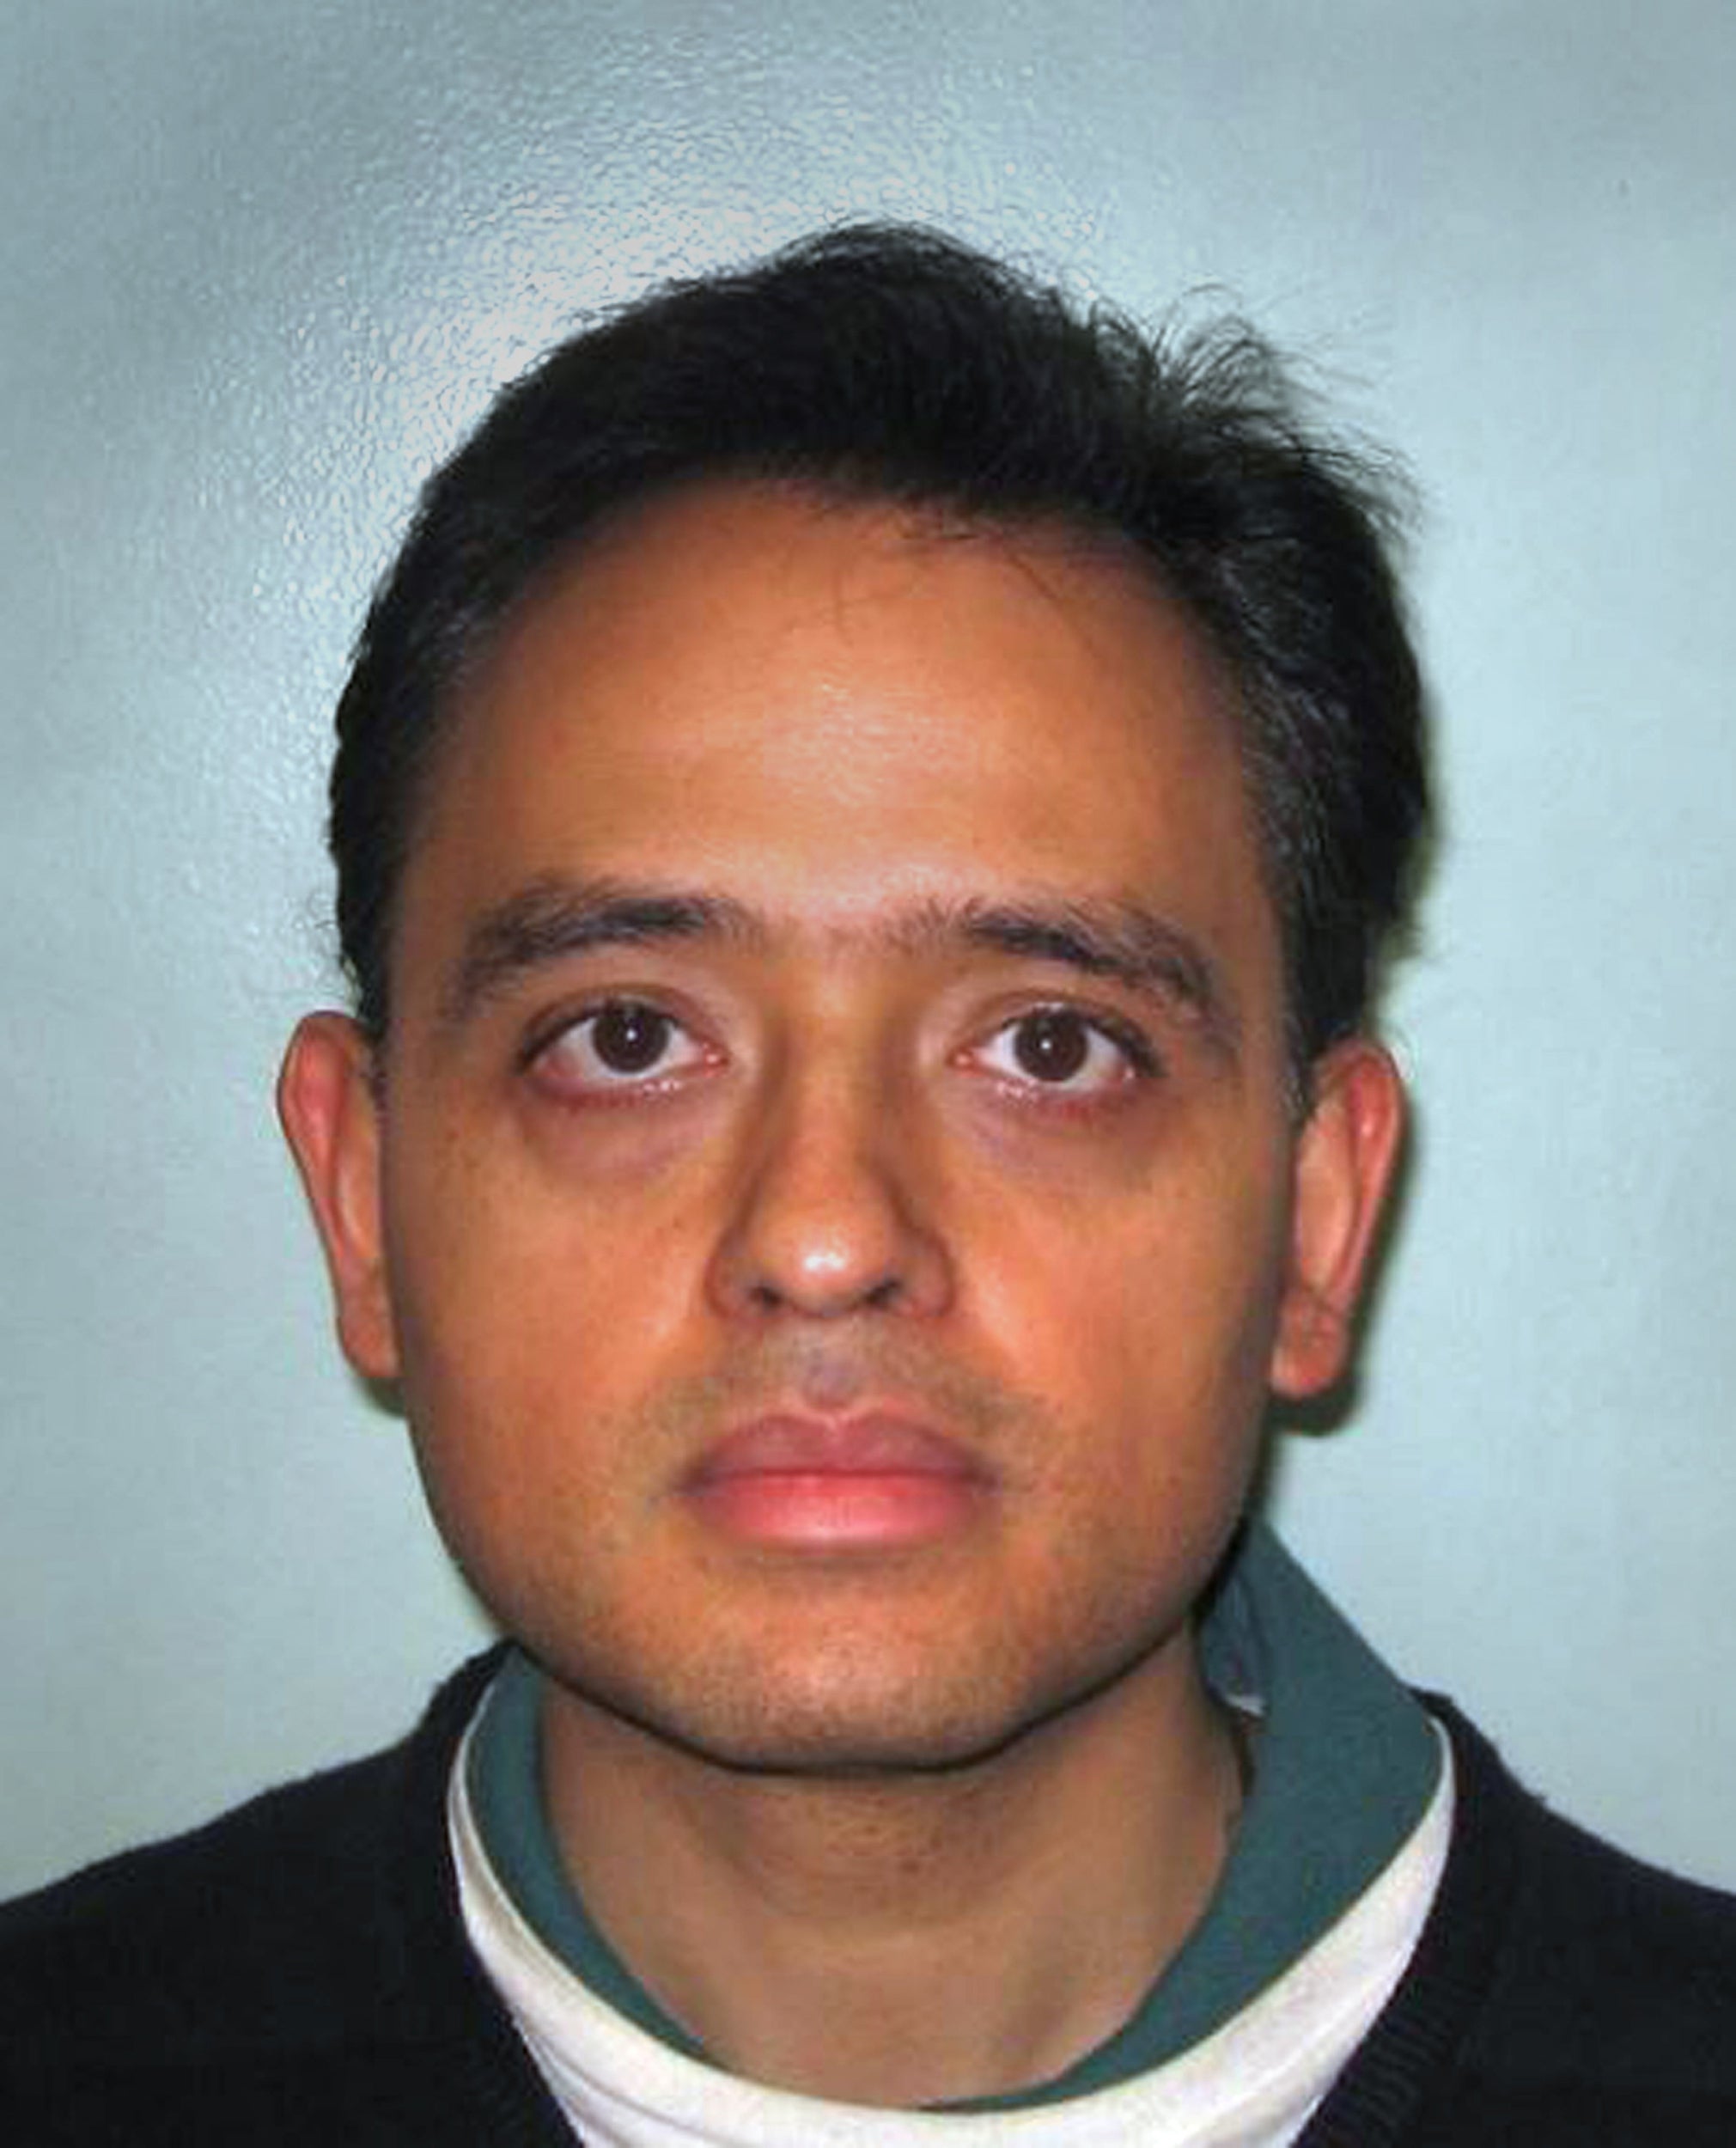 Manish Shah was handed three life sentences at the Old Bailey